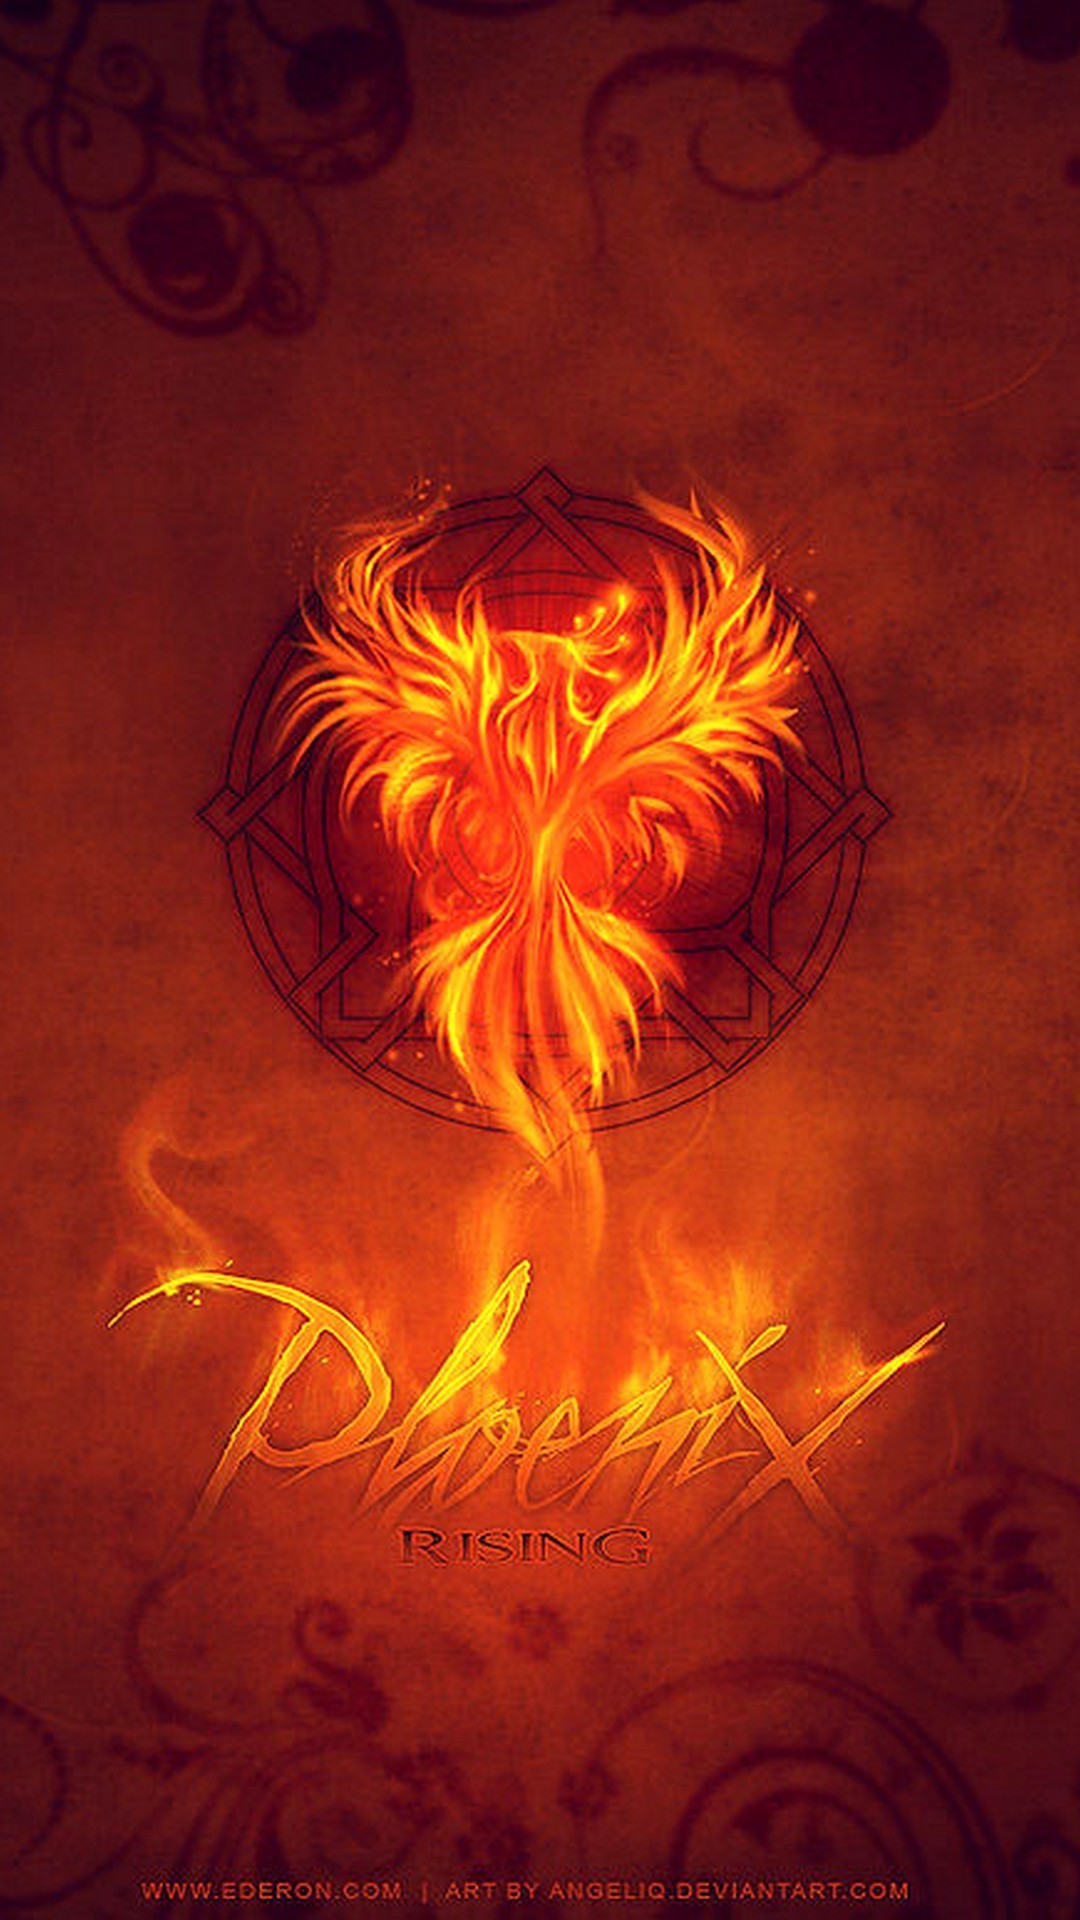 Phoenix Bird Images Android Wallpaper with resolution 1080X1920 pixel. You can make this wallpaper for your Android backgrounds, Tablet, Smartphones Screensavers and Mobile Phone Lock Screen